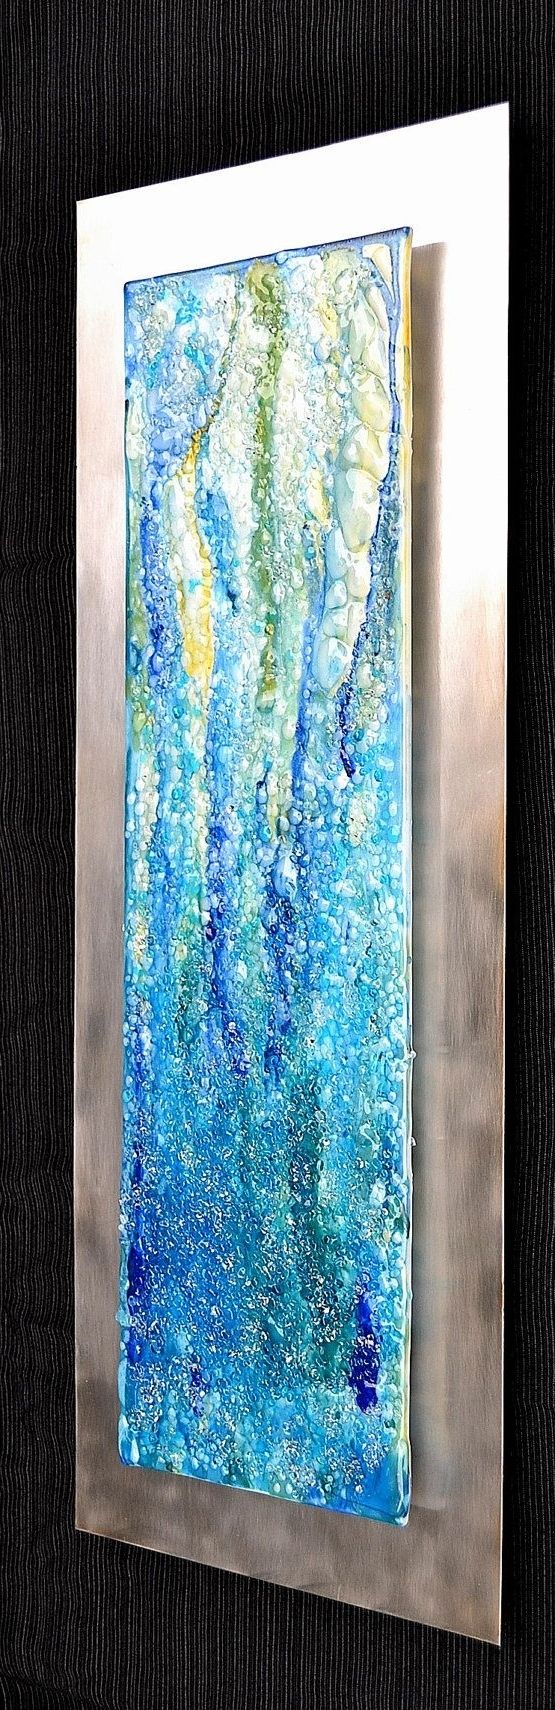 Best And Newest Fused Glass Wall Art Hanging With Waterfall – Modern Fused Glass Wall Hanging Art On Stainless Steel (View 2 of 15)